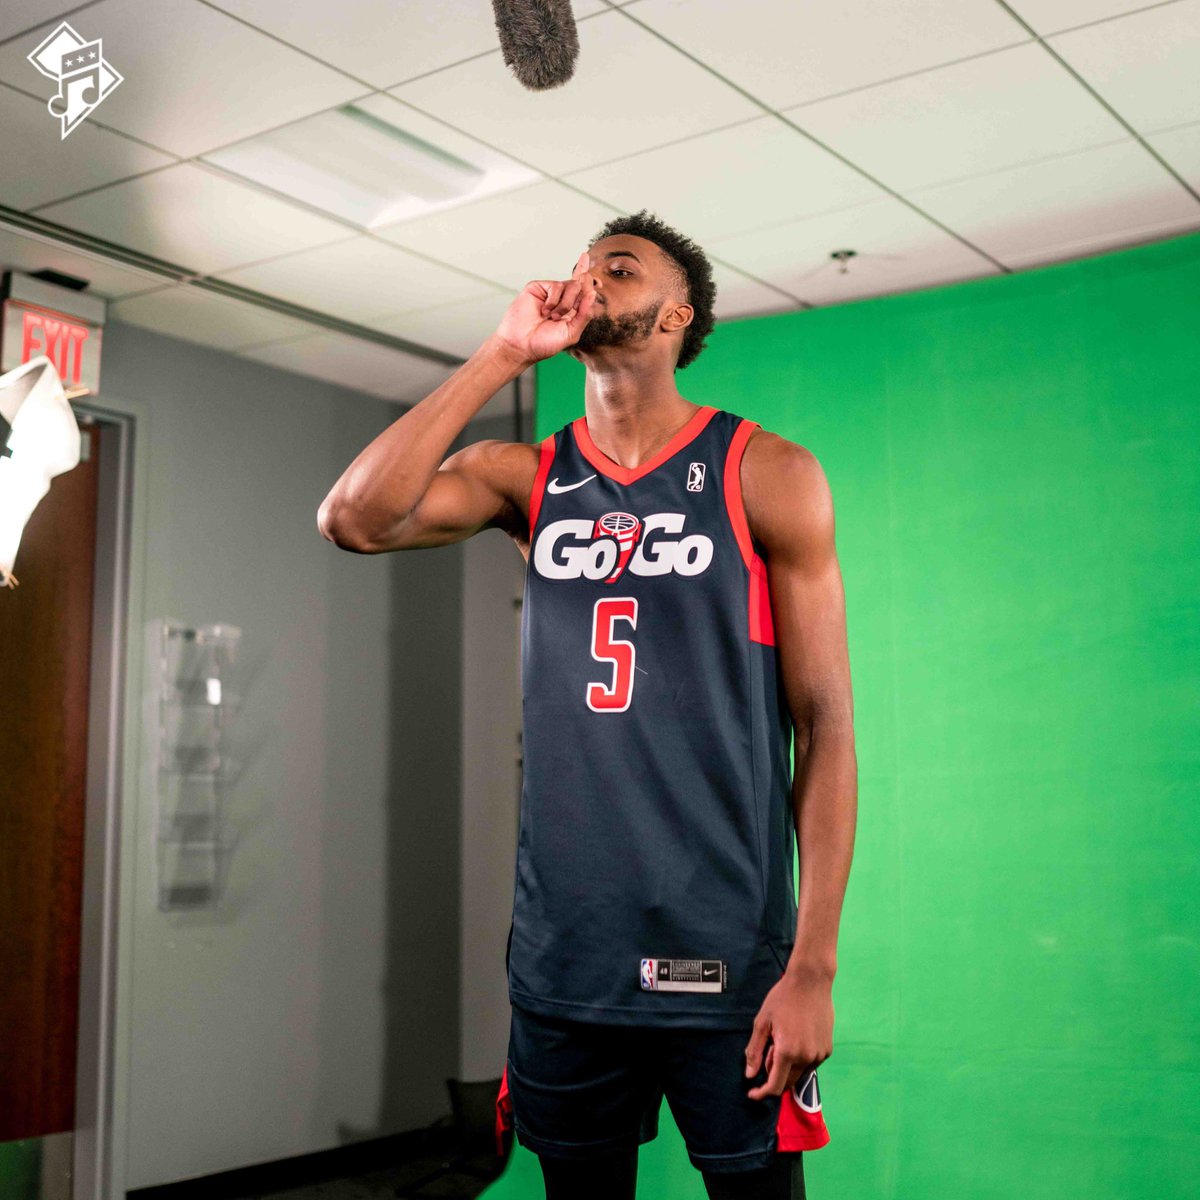 Let’s go behind the scenes of Go-Go Media Day! #BeatOfDC